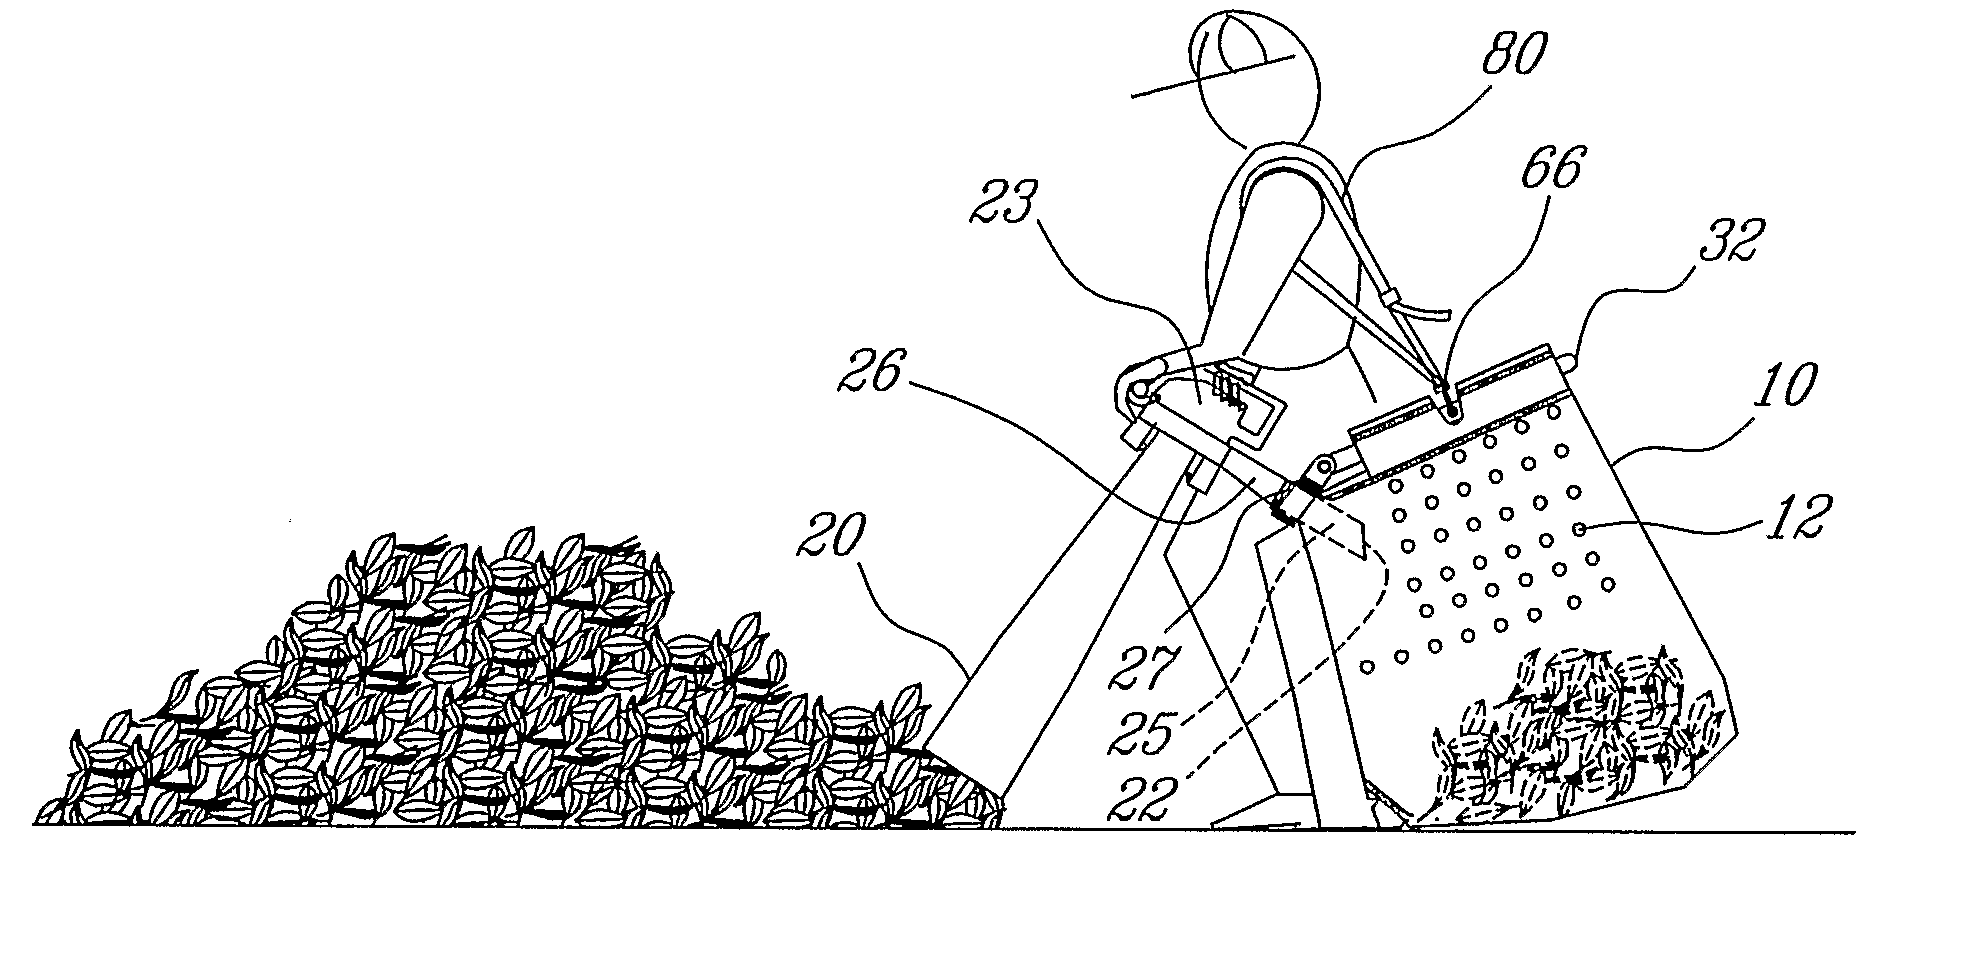 Bag carrying device for a vacuum/blower